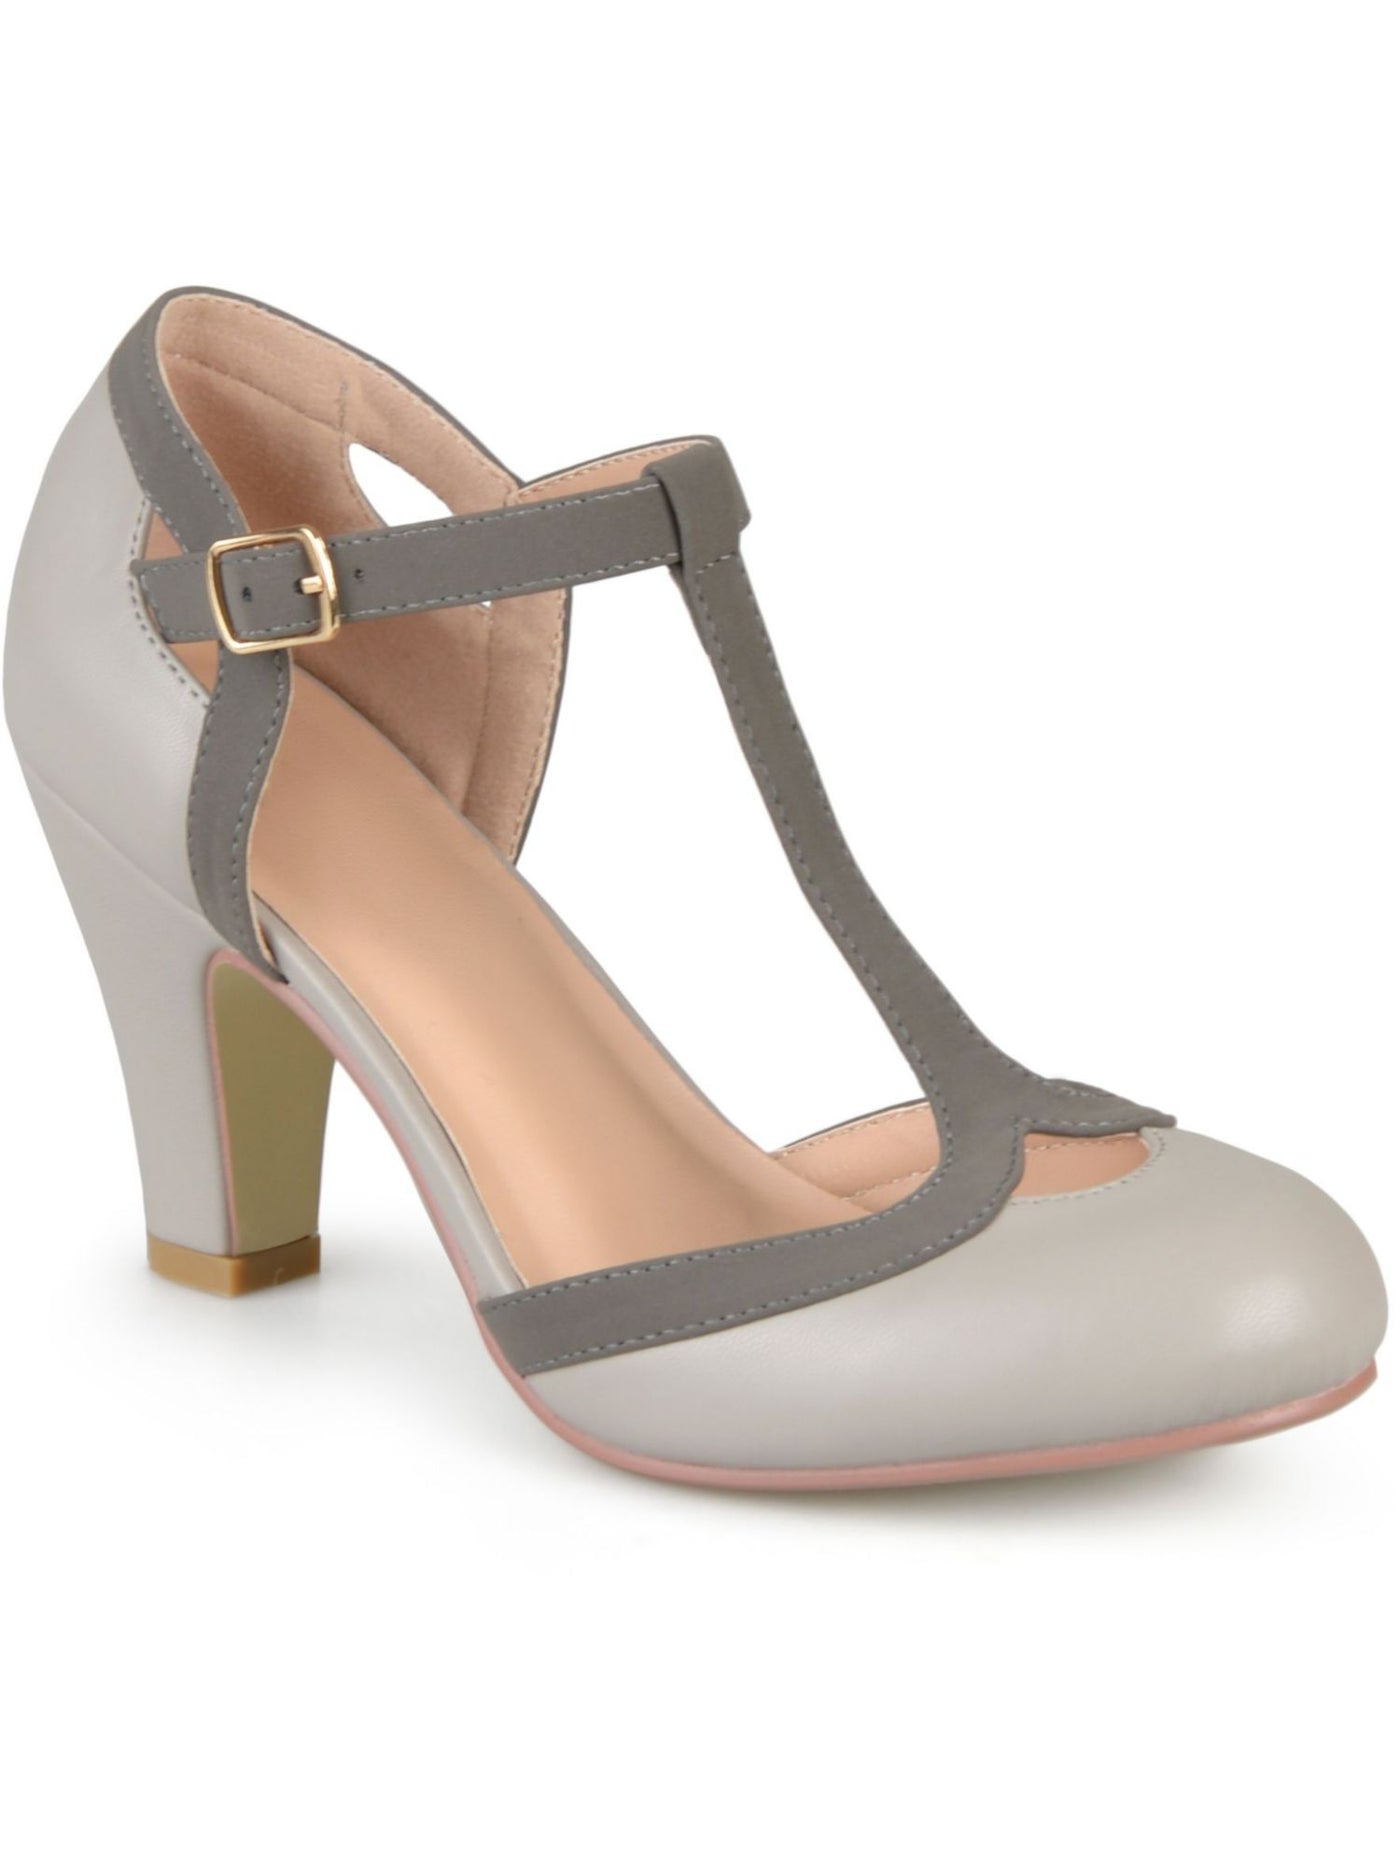 JOURNEE COLLECTION Womens Gray Mary Jane Adjustable T-Strap Olina Round Toe Block Heel Buckle Pumps Shoes 7 W